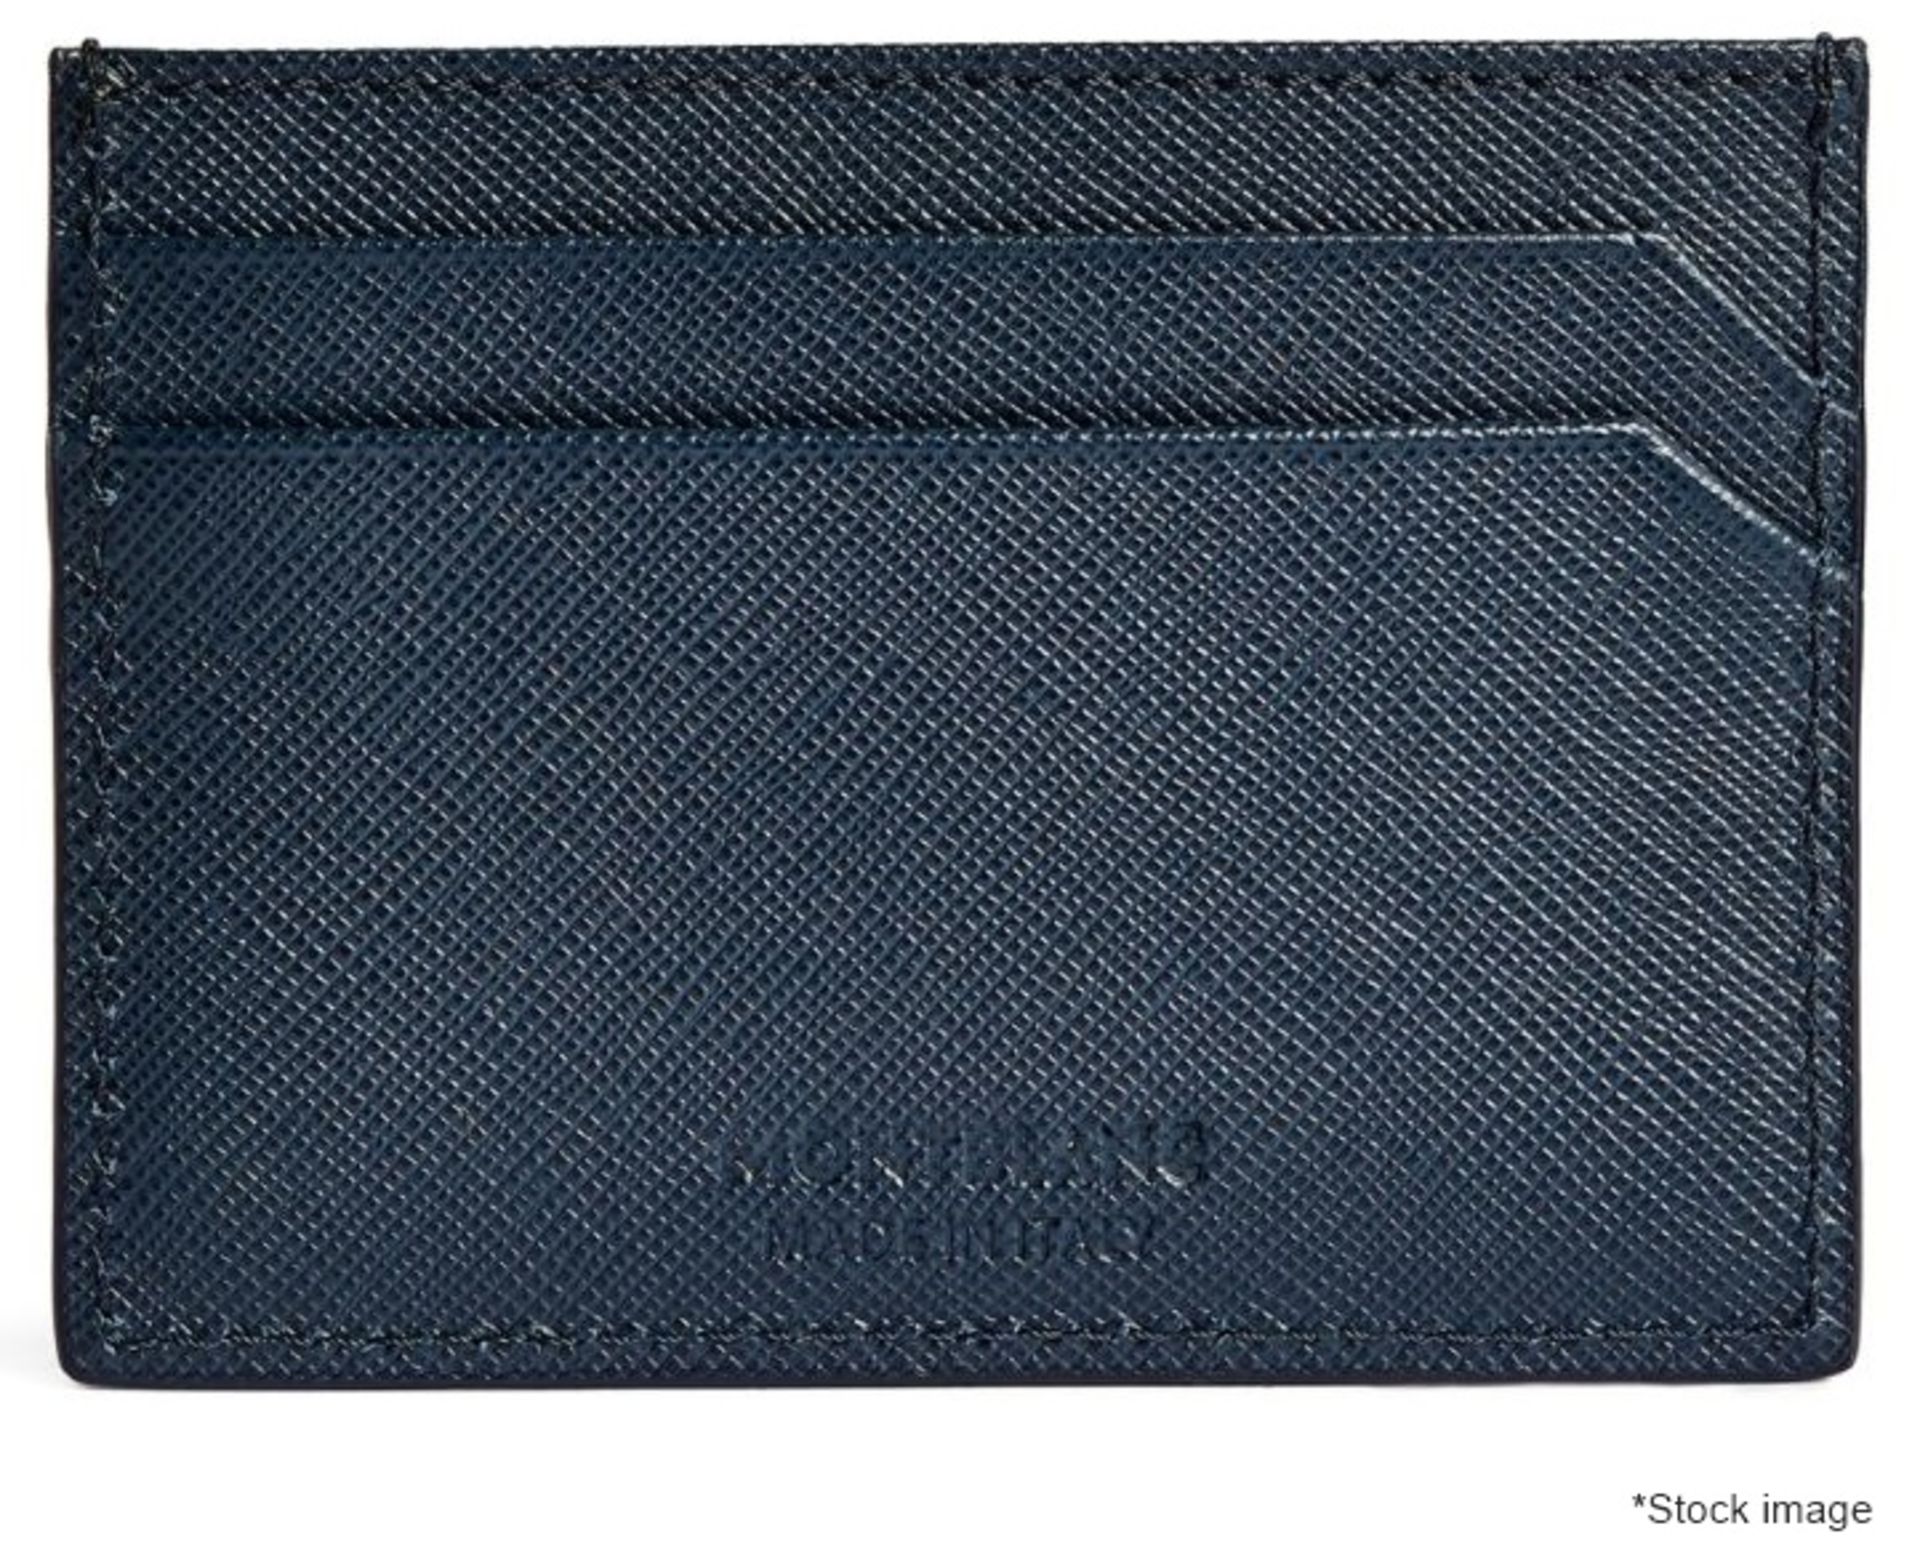 1 x MONTBLANC Sartorial Blue Luxury Leather Card Holder - Original Price £160.00 - Boxed Stock - Image 2 of 10